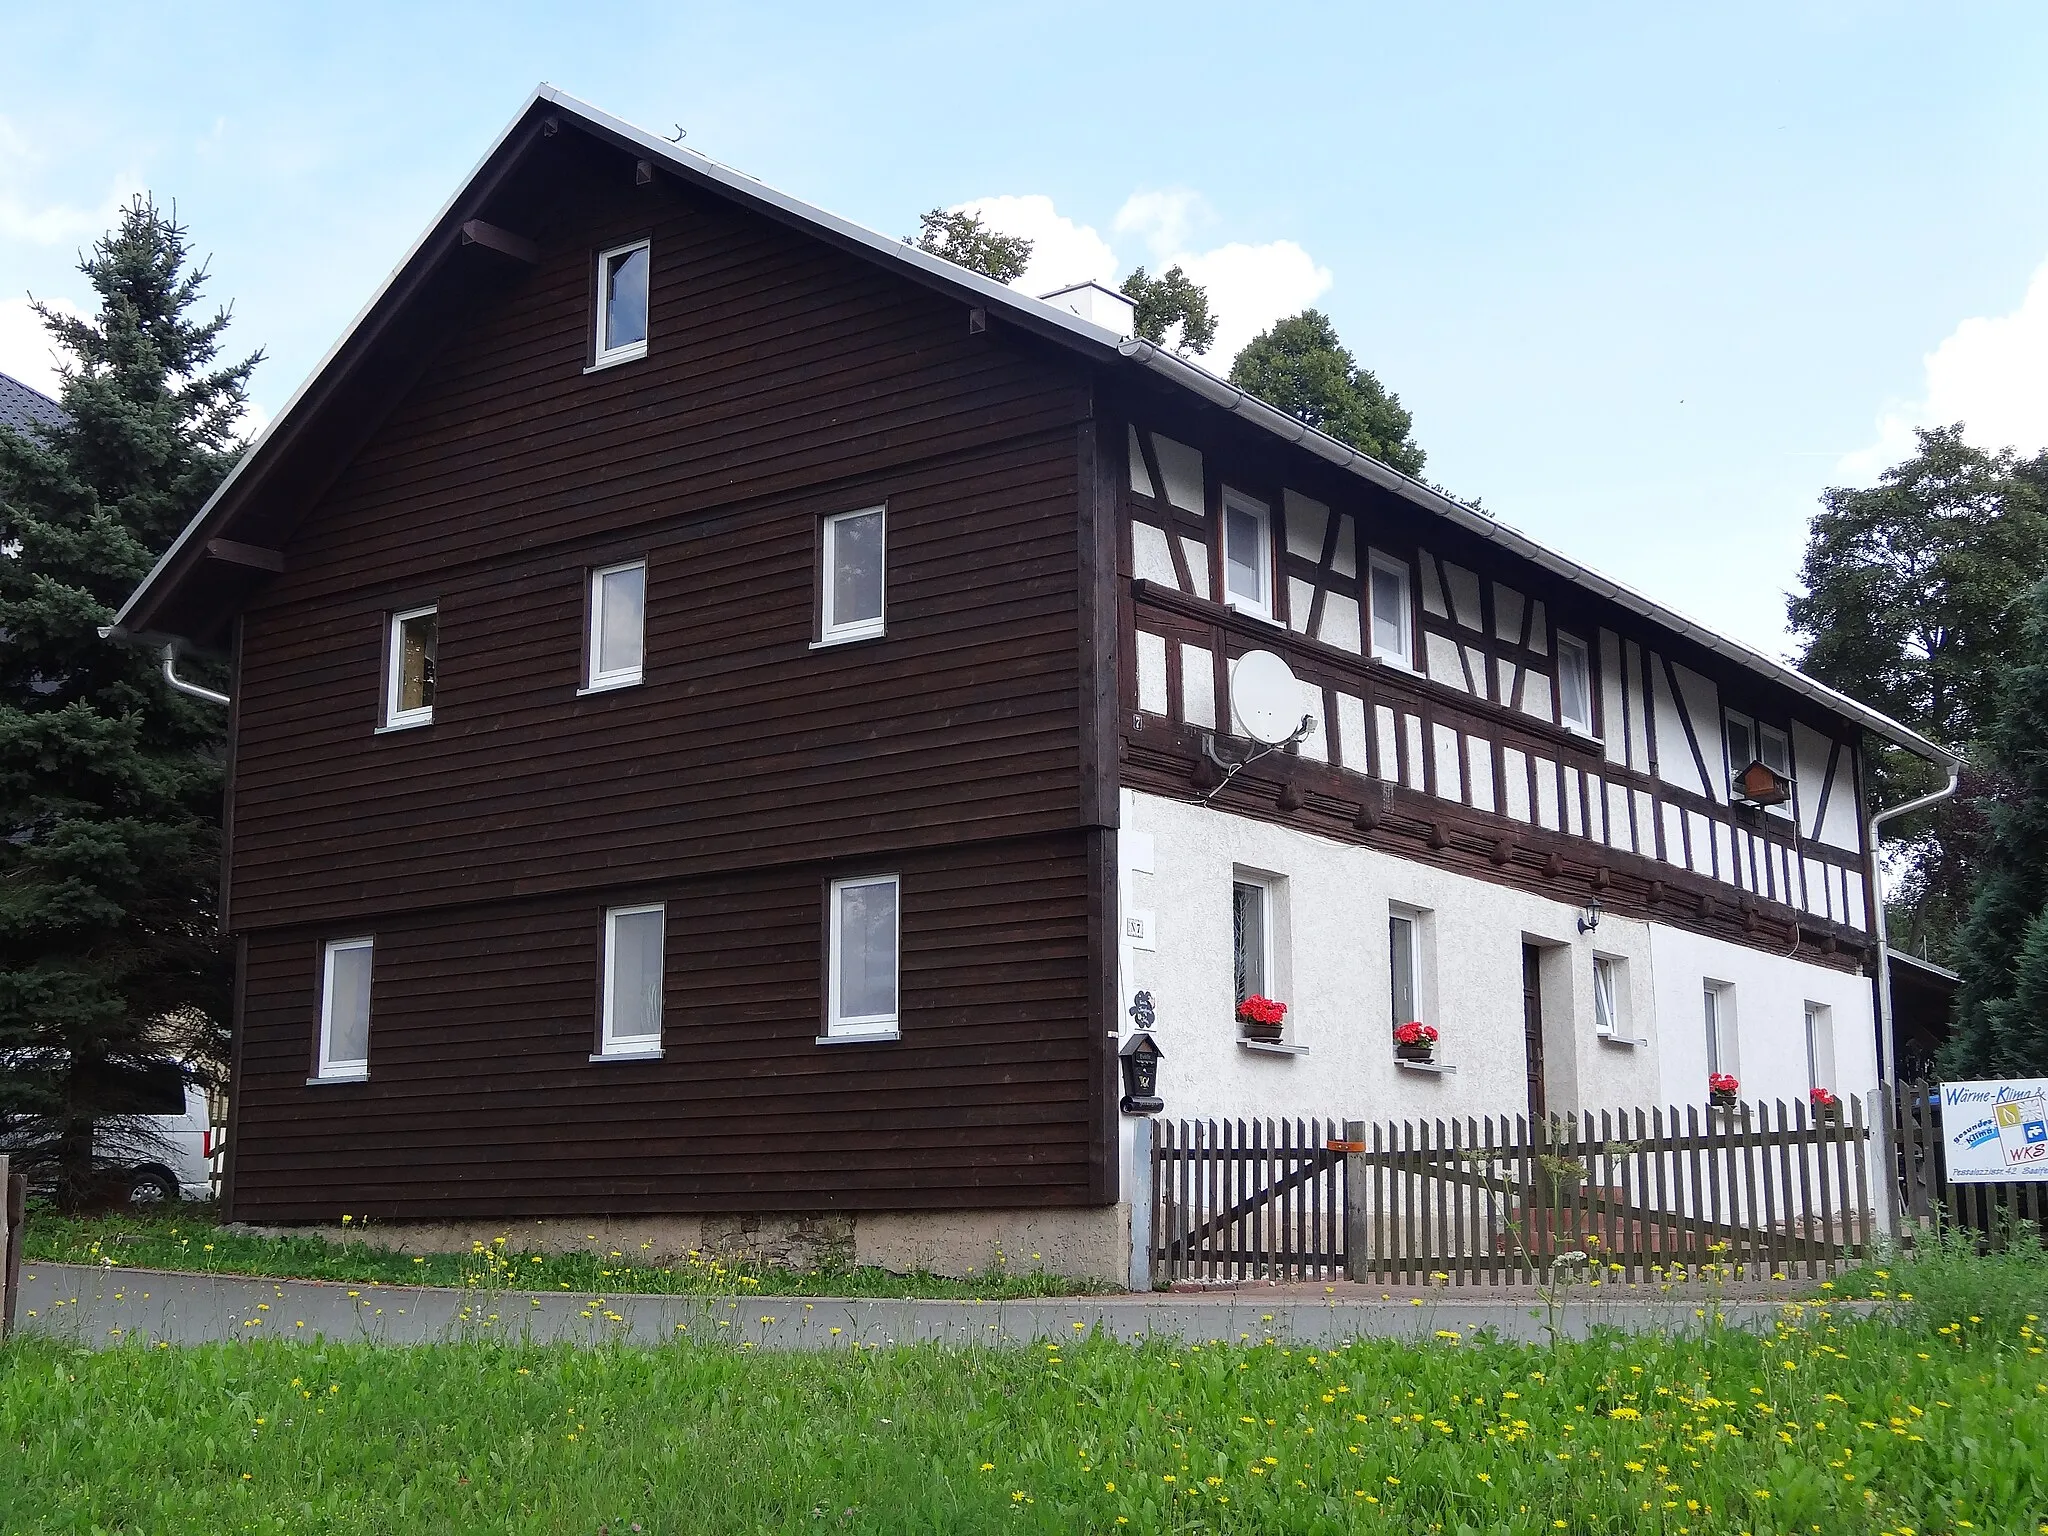 Photo showing: Timber framed houses in Witzendorf, Saalfelder Höhe, Thuringia, Germany